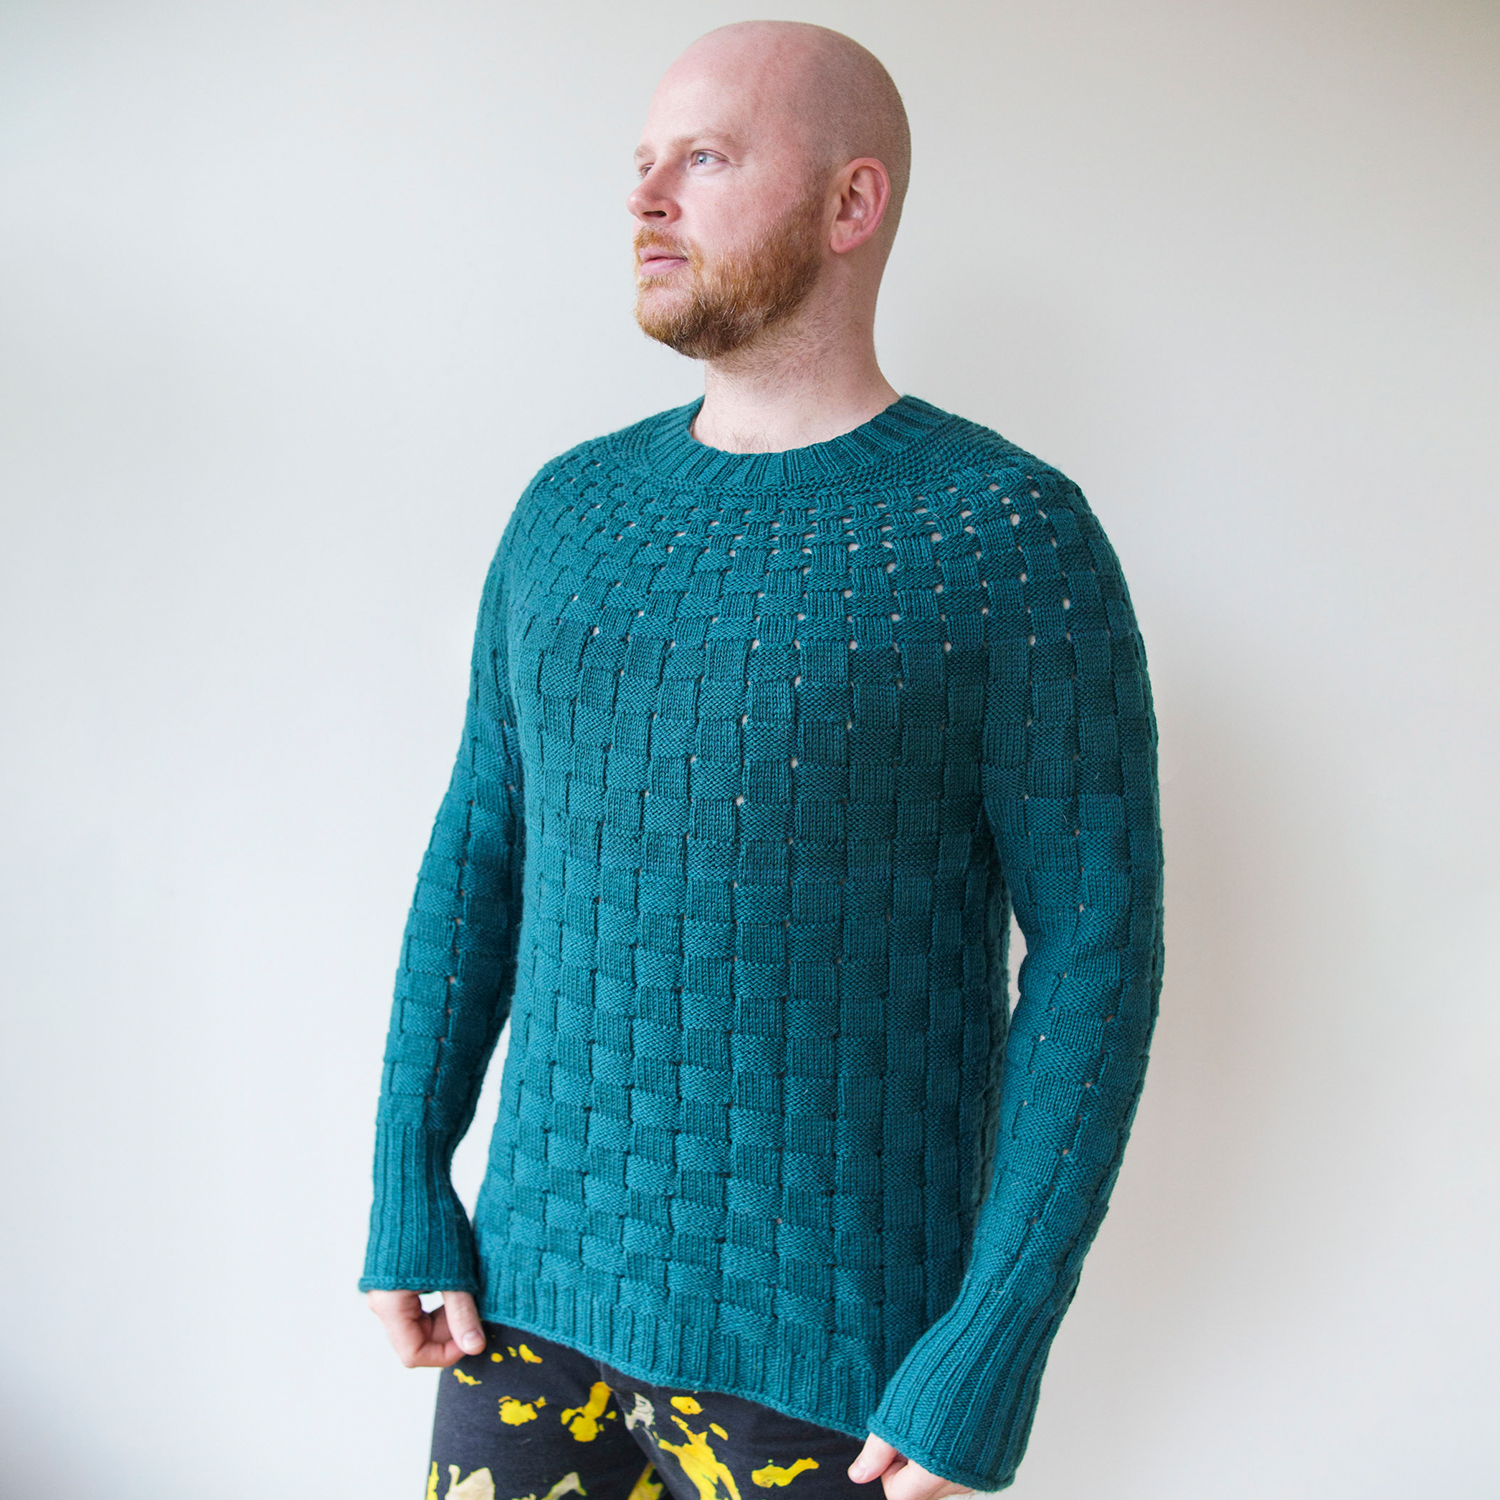 THE BASKETWEAVER SWEATER - GREEN OLIVE